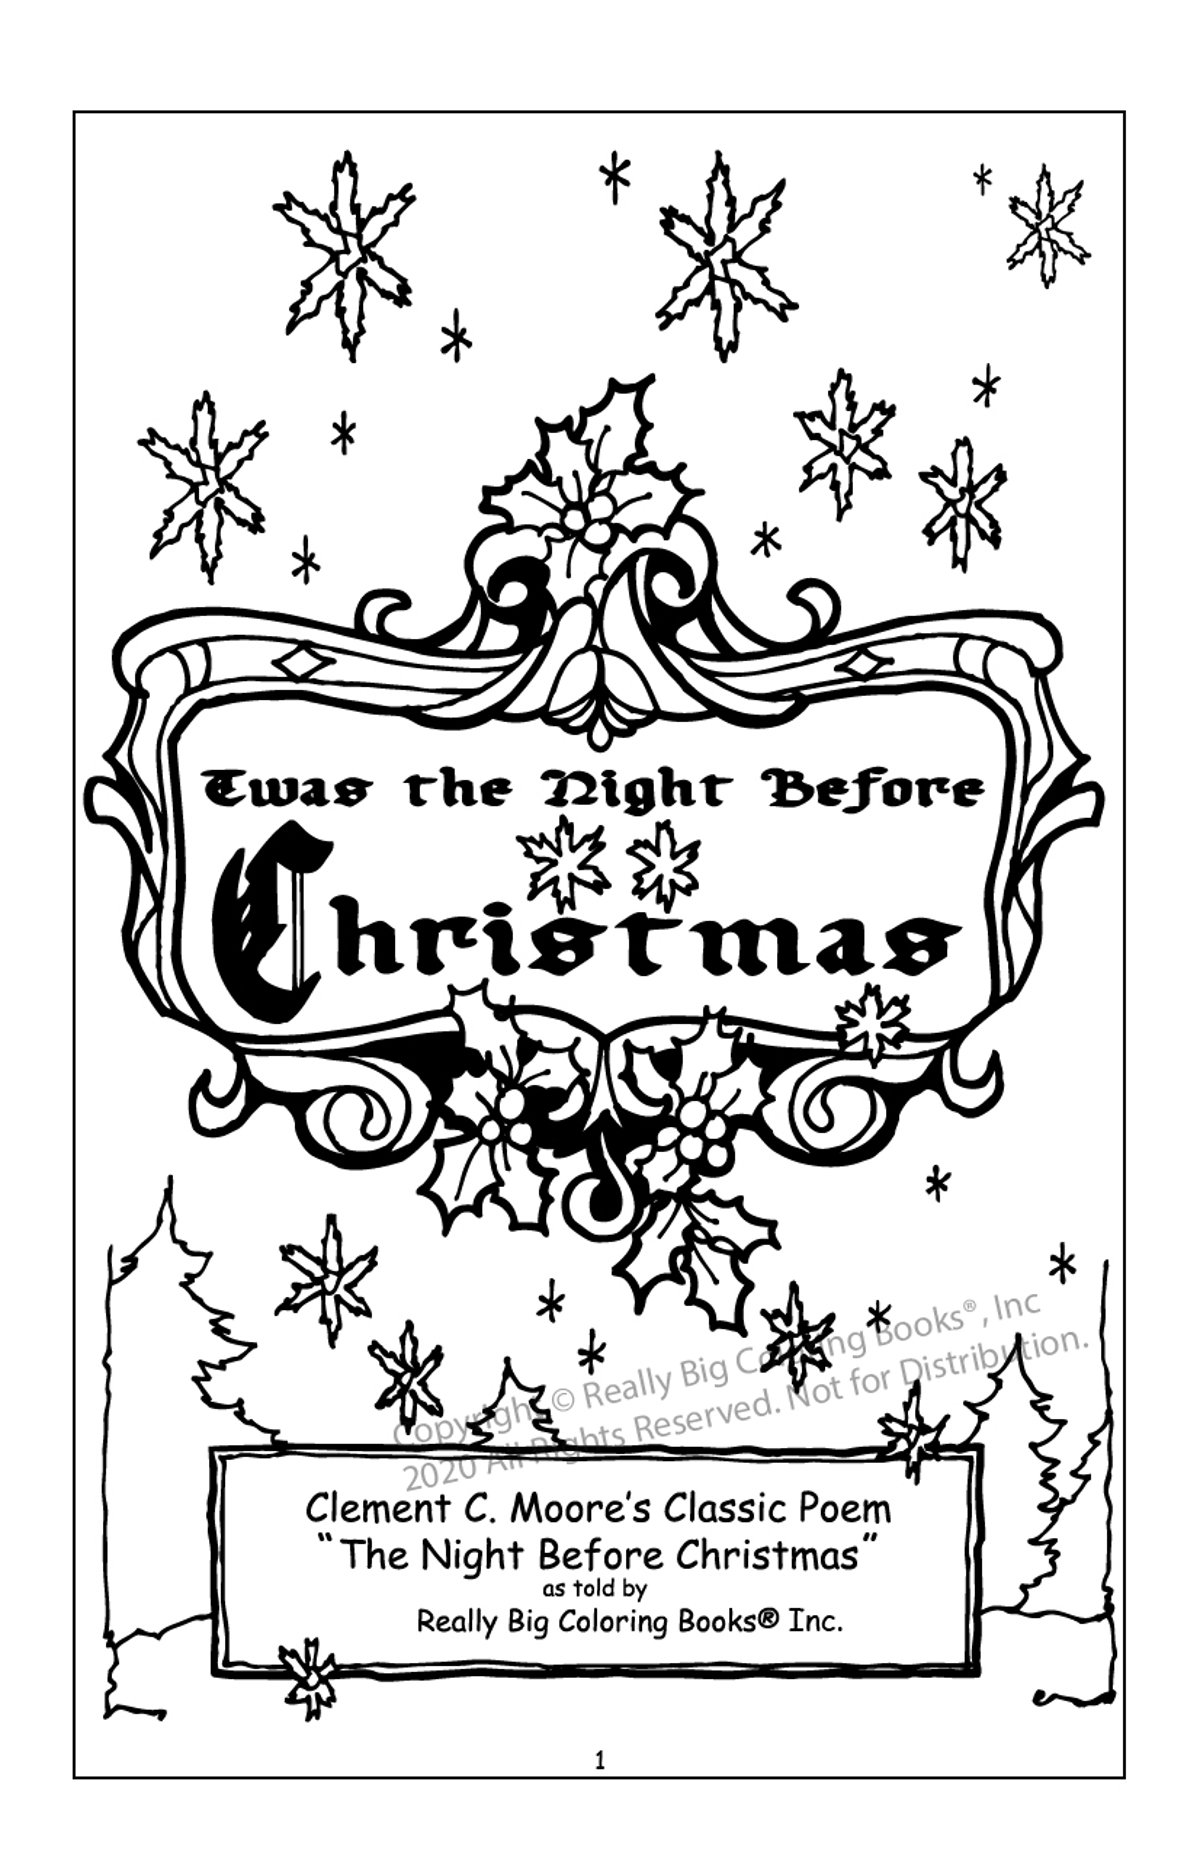 Really big coloring books twas the night before christmas fun and educational coloring book